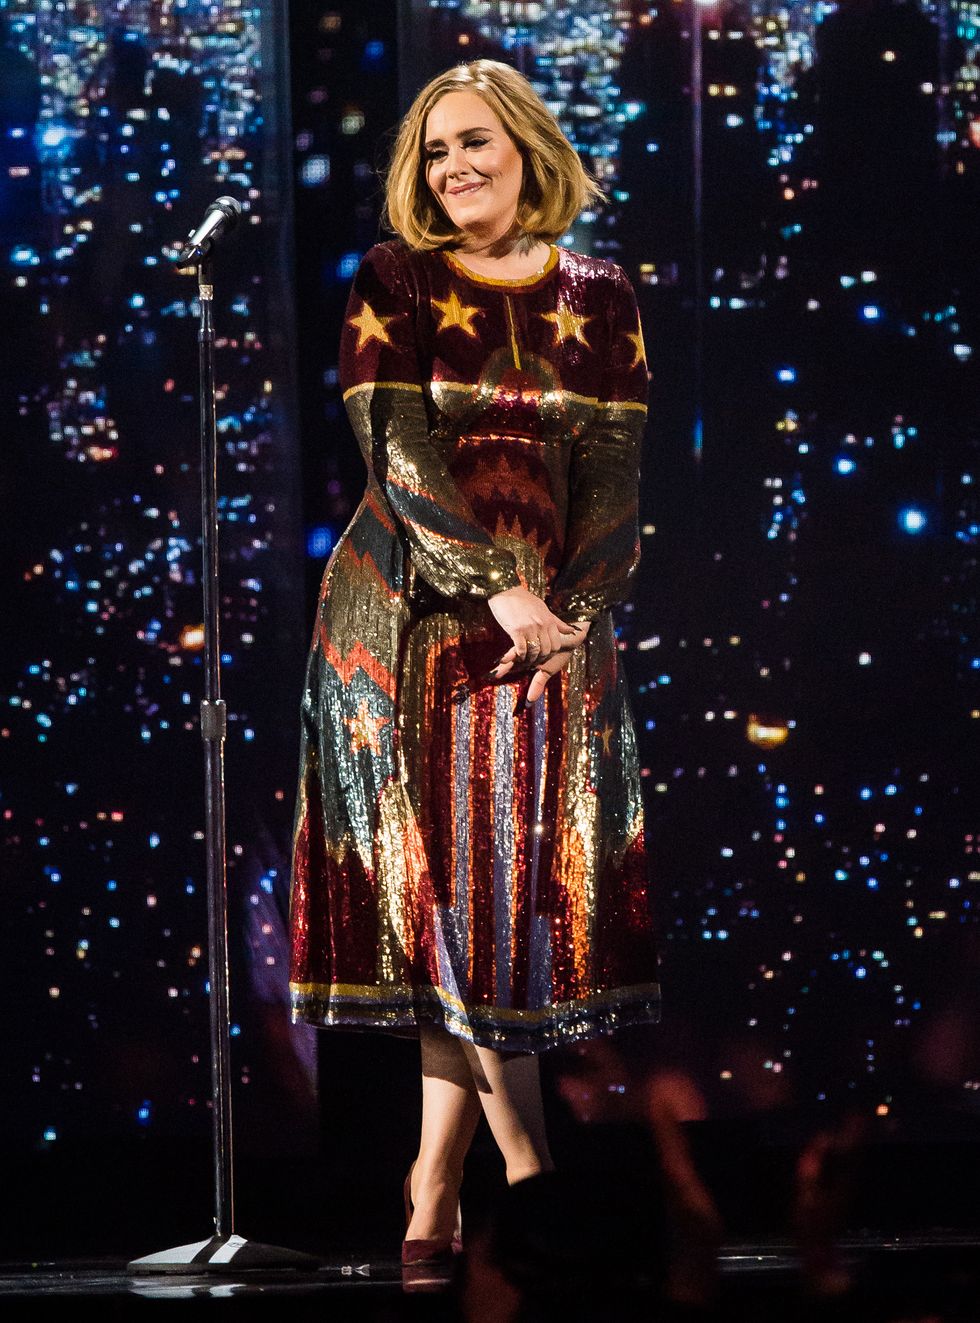 Adele performing on stage - helps a fan propose